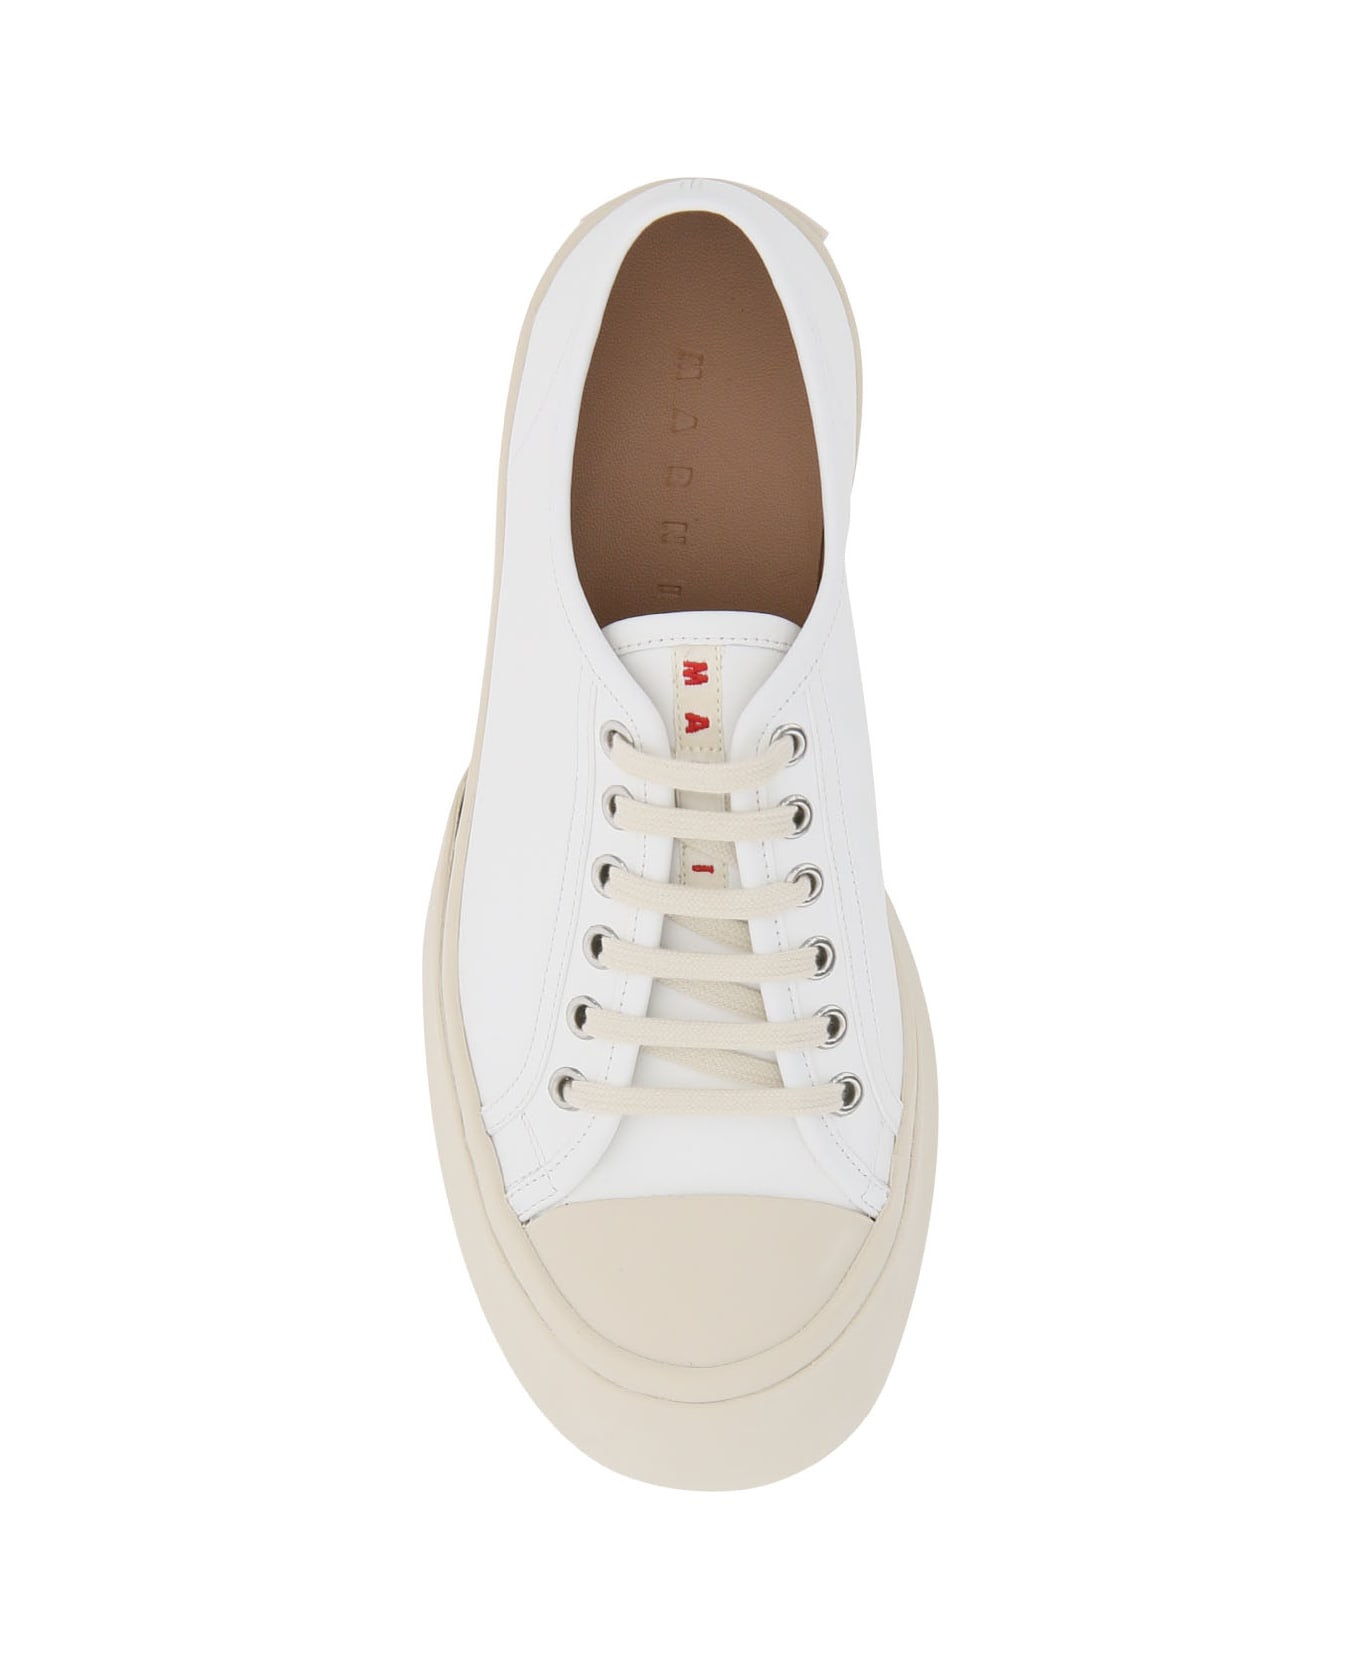 Marni Pablo Leather Sneakers - White スニーカー